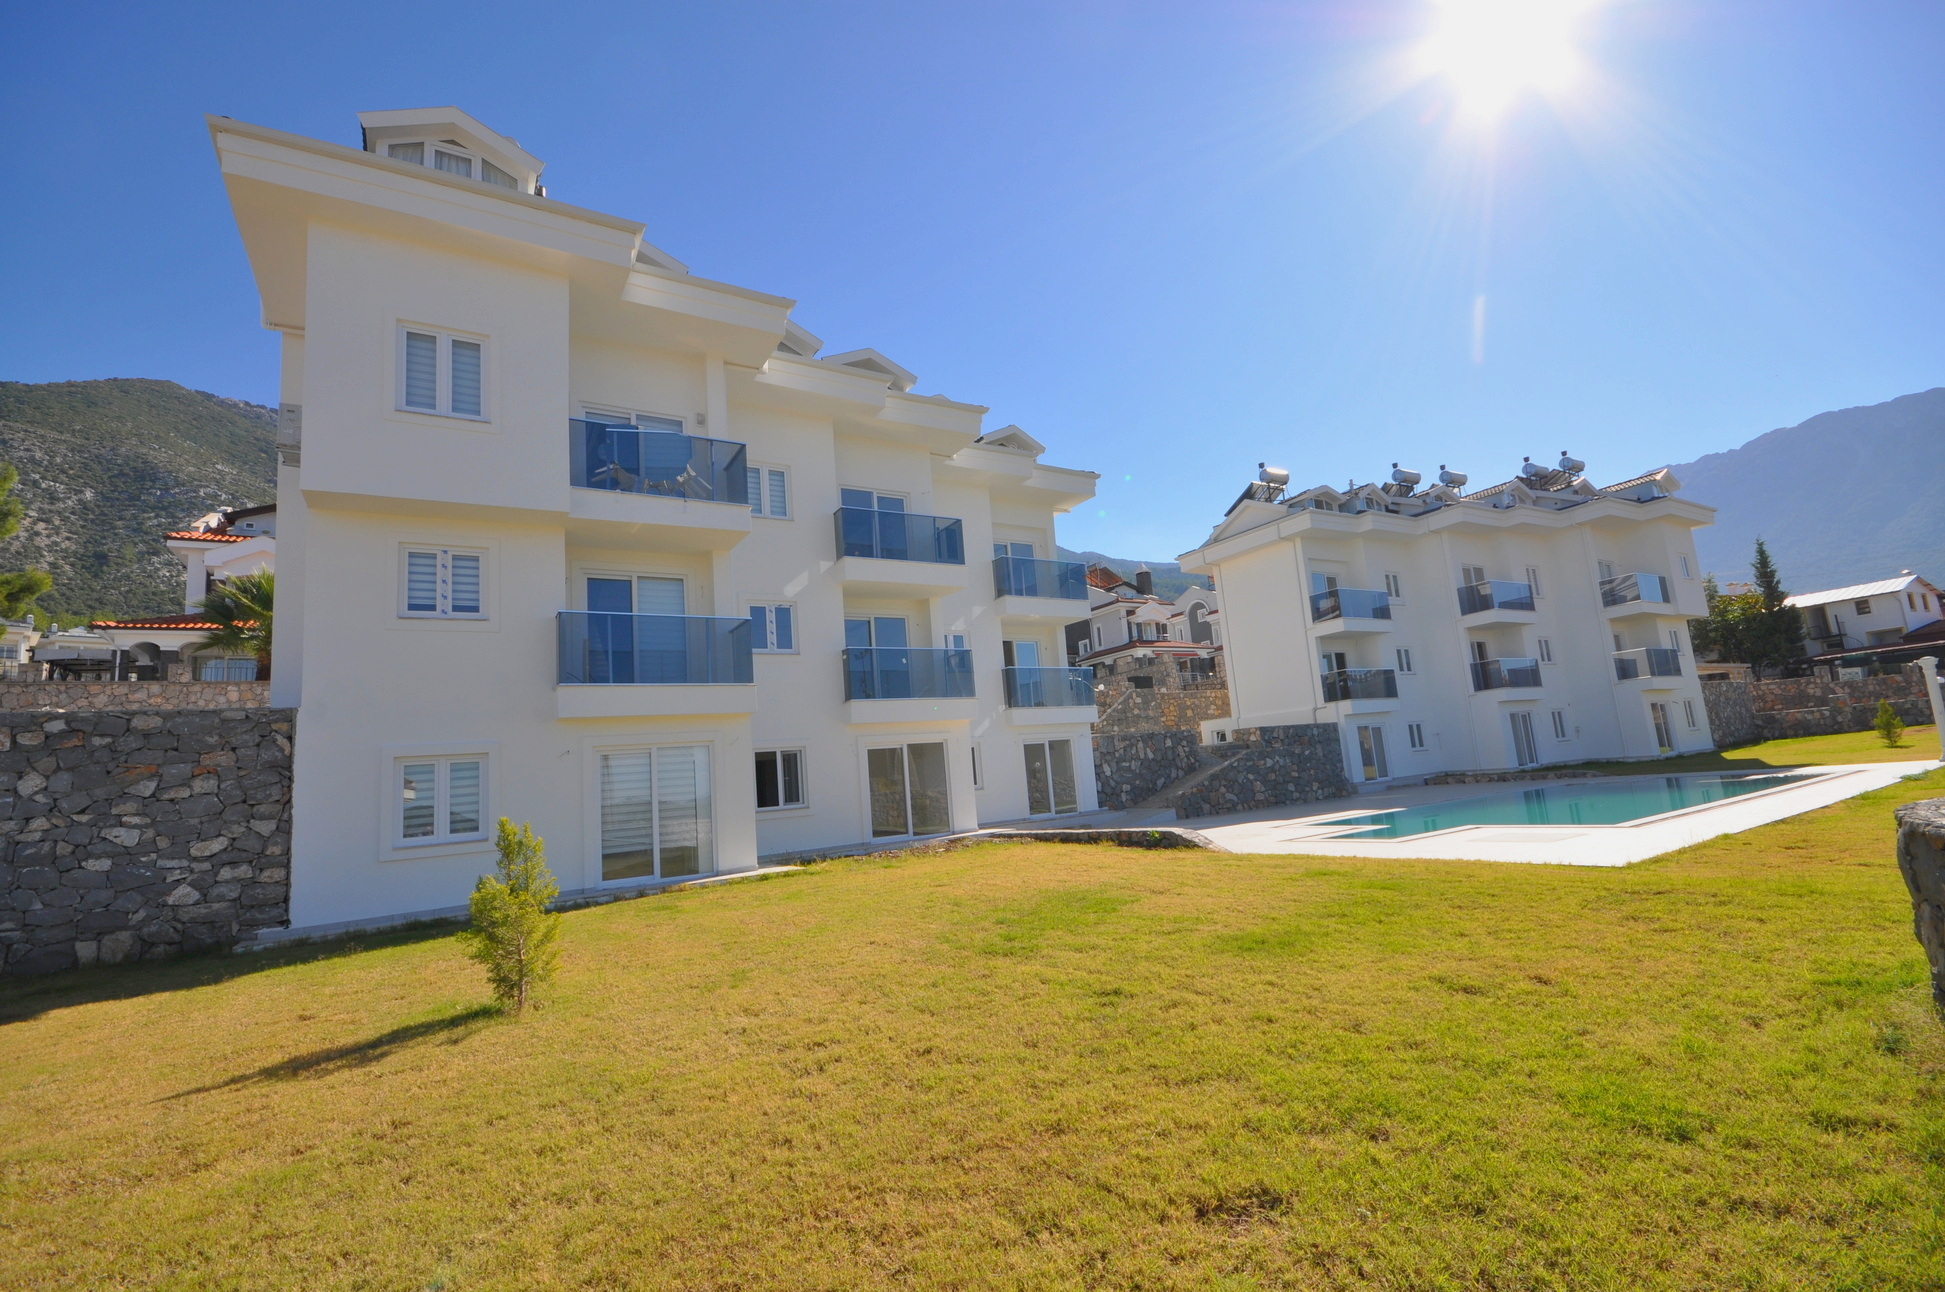 Stunning Two Bedroom Duplex Apartment with Shared Pool in Ovacik